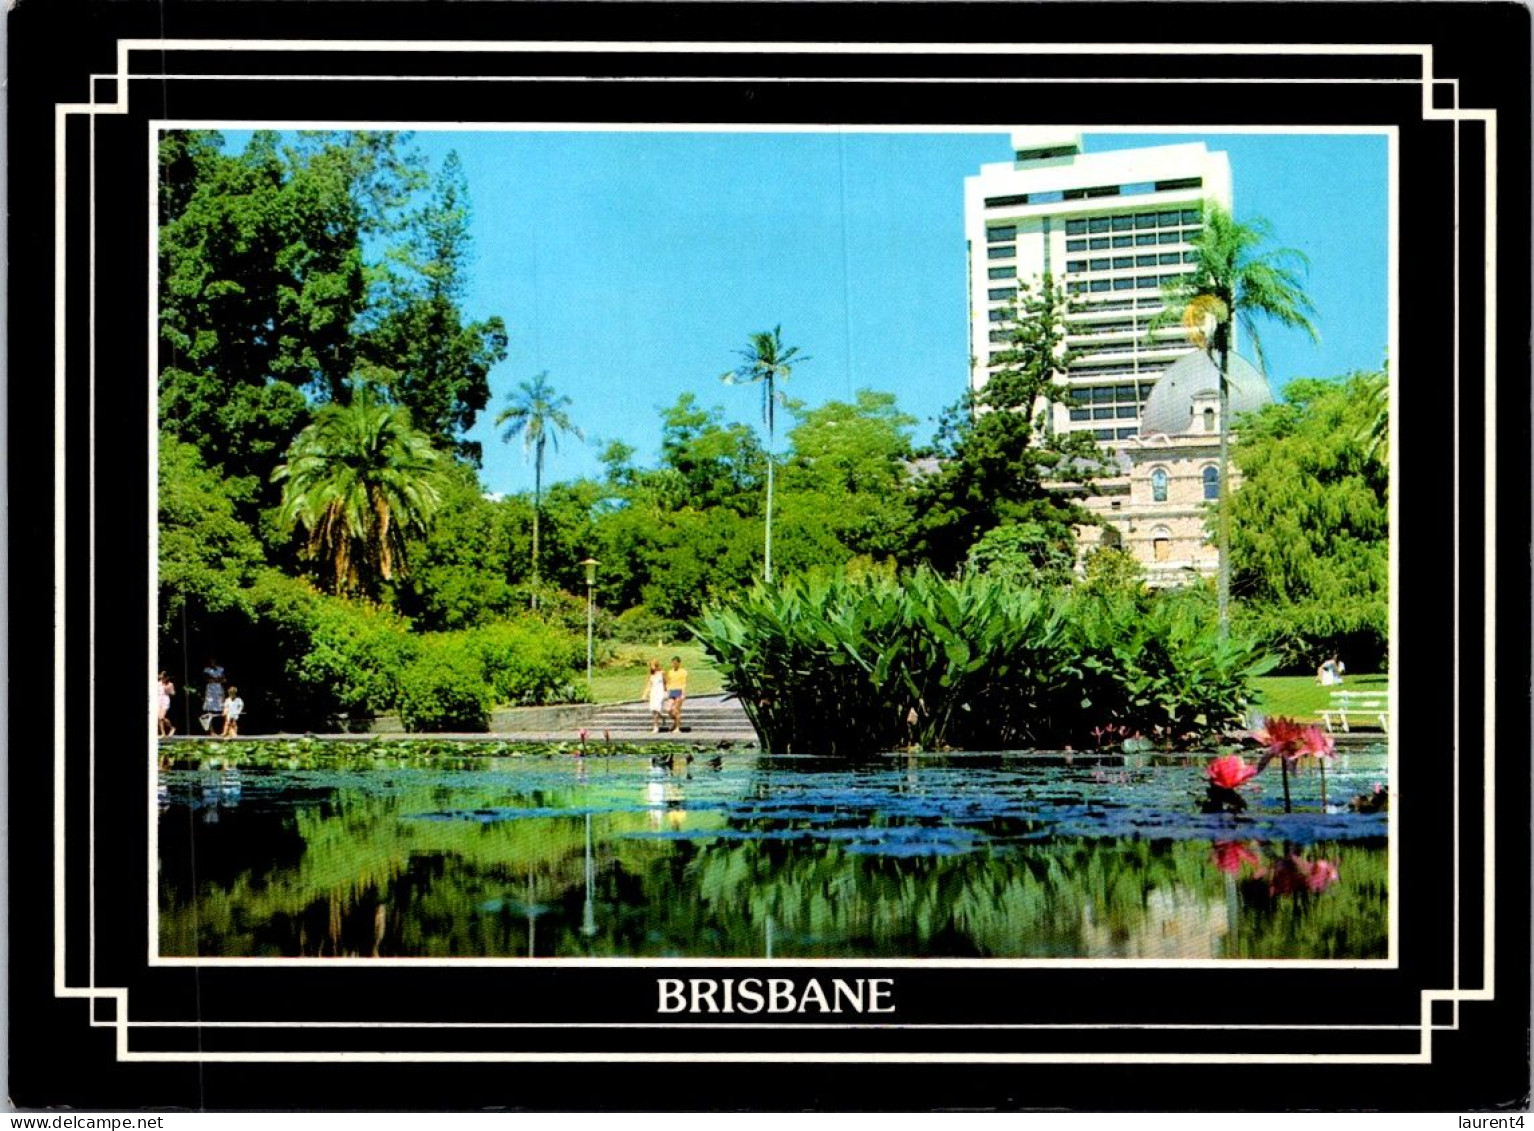 1-2-2024 (3 X 1) Australia (posted To France With Pair Of Bilby Stamp) QLD - Brisbane Botanical Gardens & Parliament - Brisbane